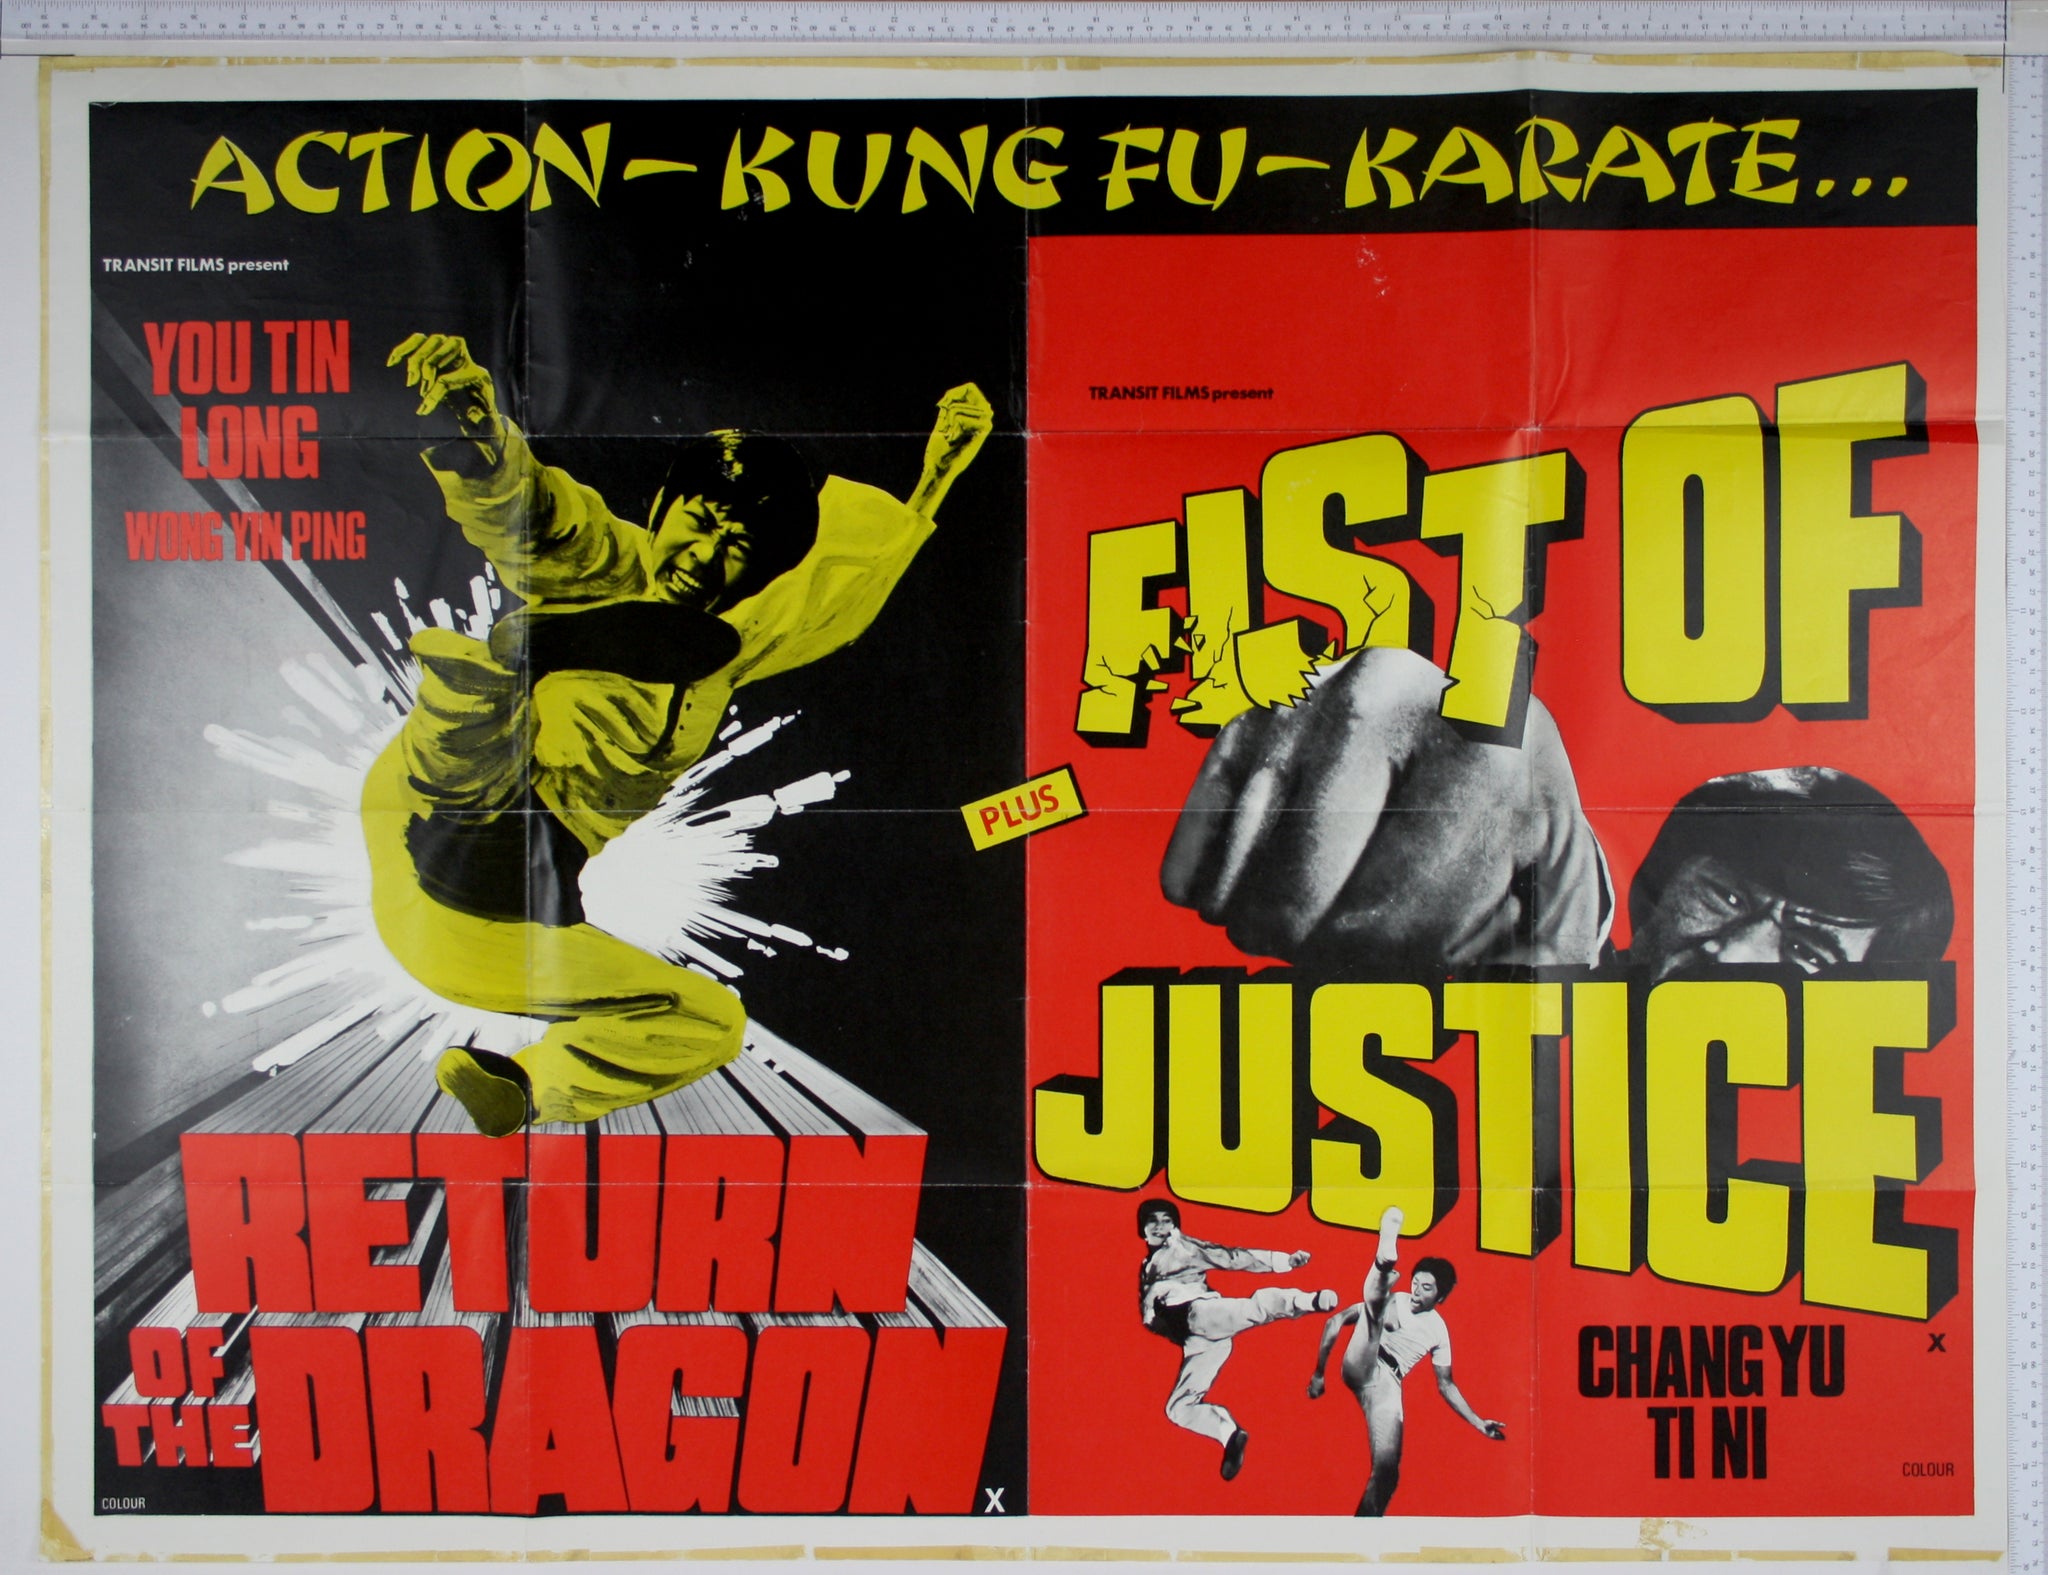 High contrast photo in yellow of kicking man, explosion behind. On right on red, close up man's fist breaks title, fighters below.